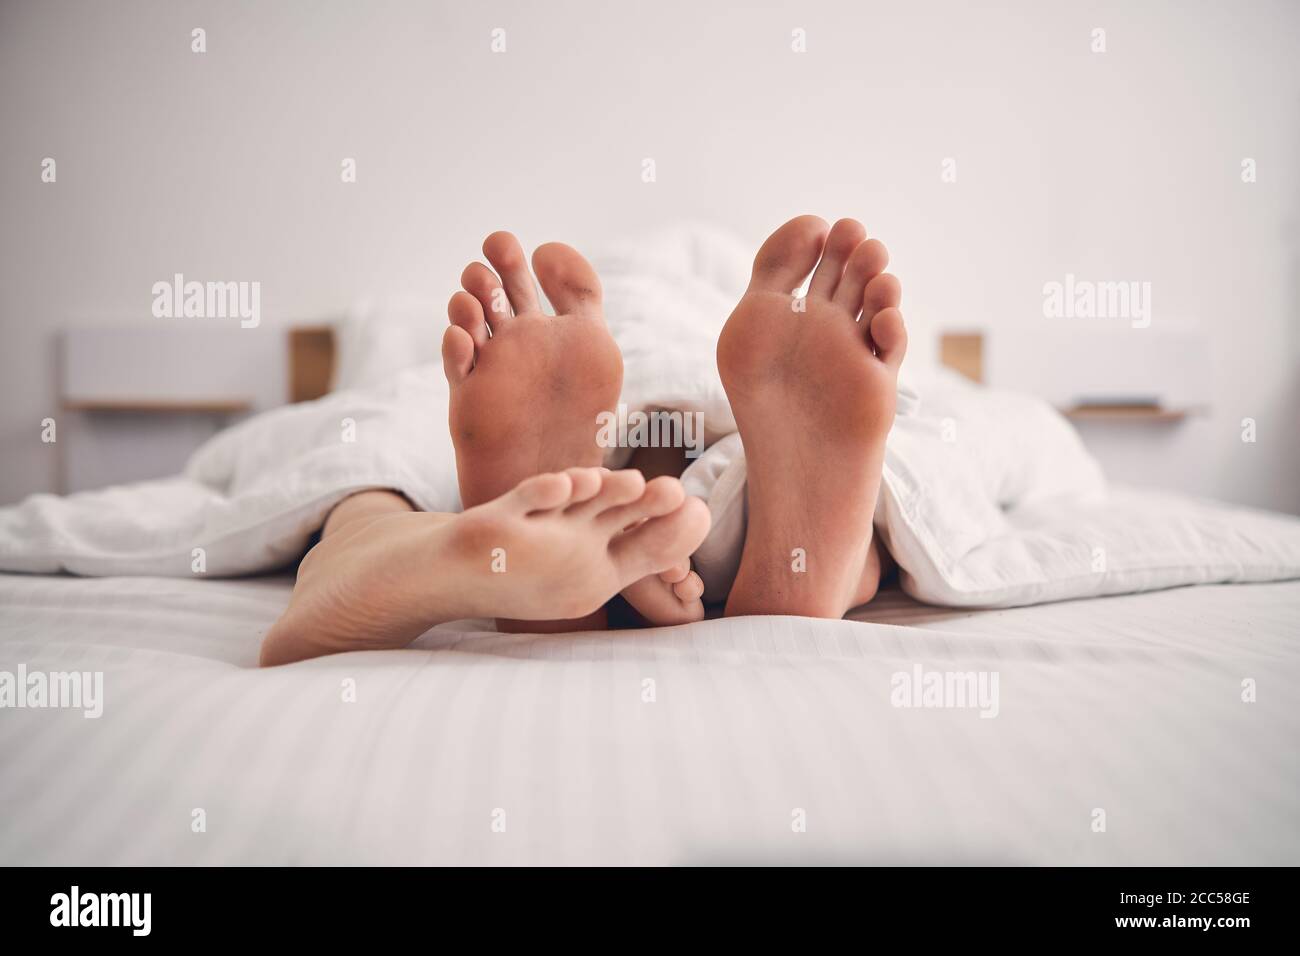 Close up of two people feet in bed Stock Photo - Alamy